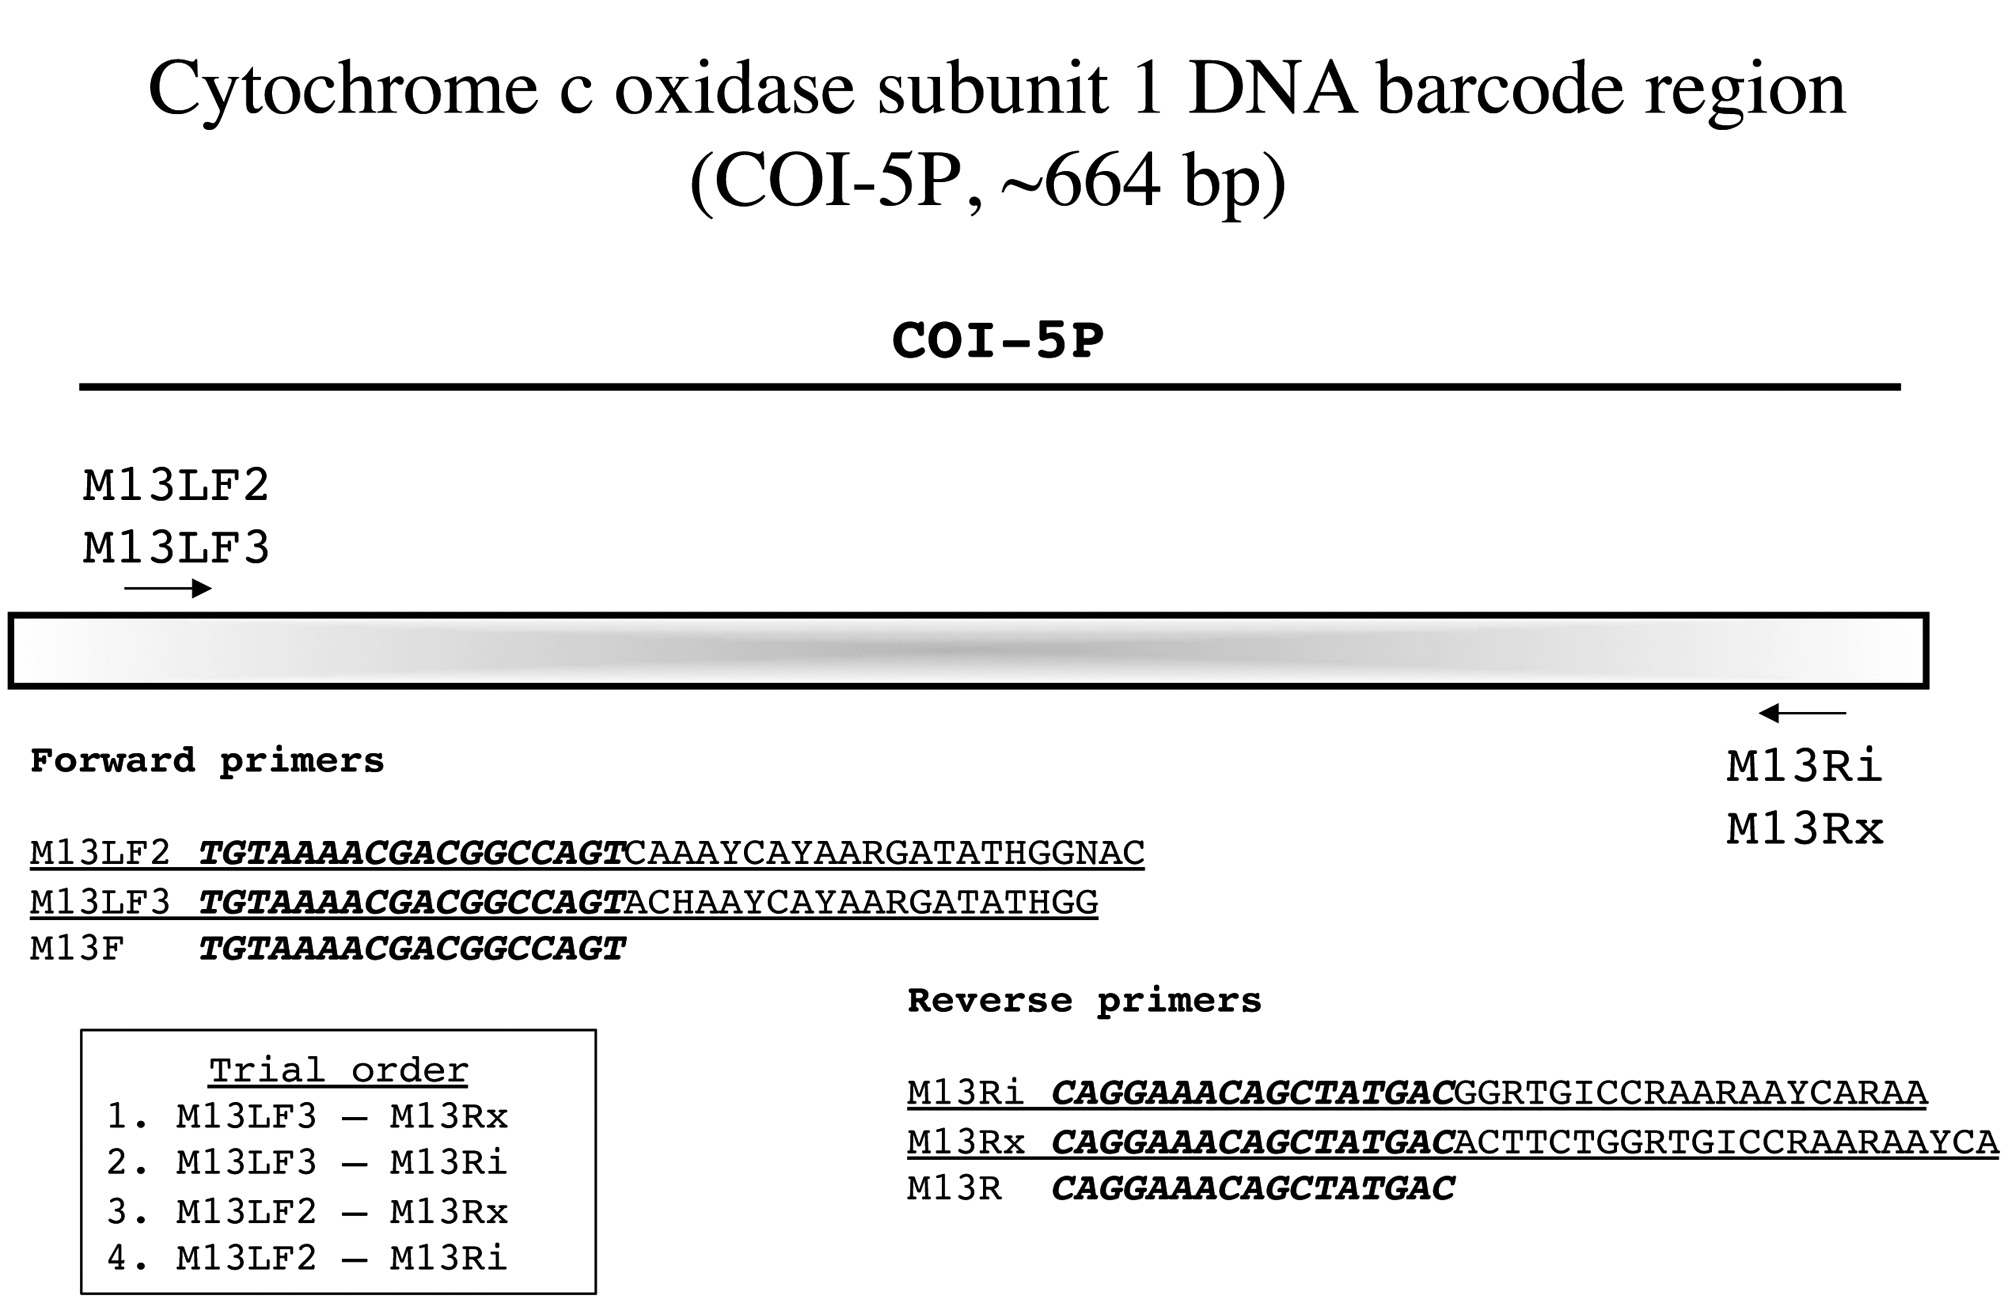 Overview of PCR / sequencing strategy for the mitochondrial COI-5P barcode marker. The order in which primer combinations are
trialed for taxa is indicated from the first (best) to fourth option.